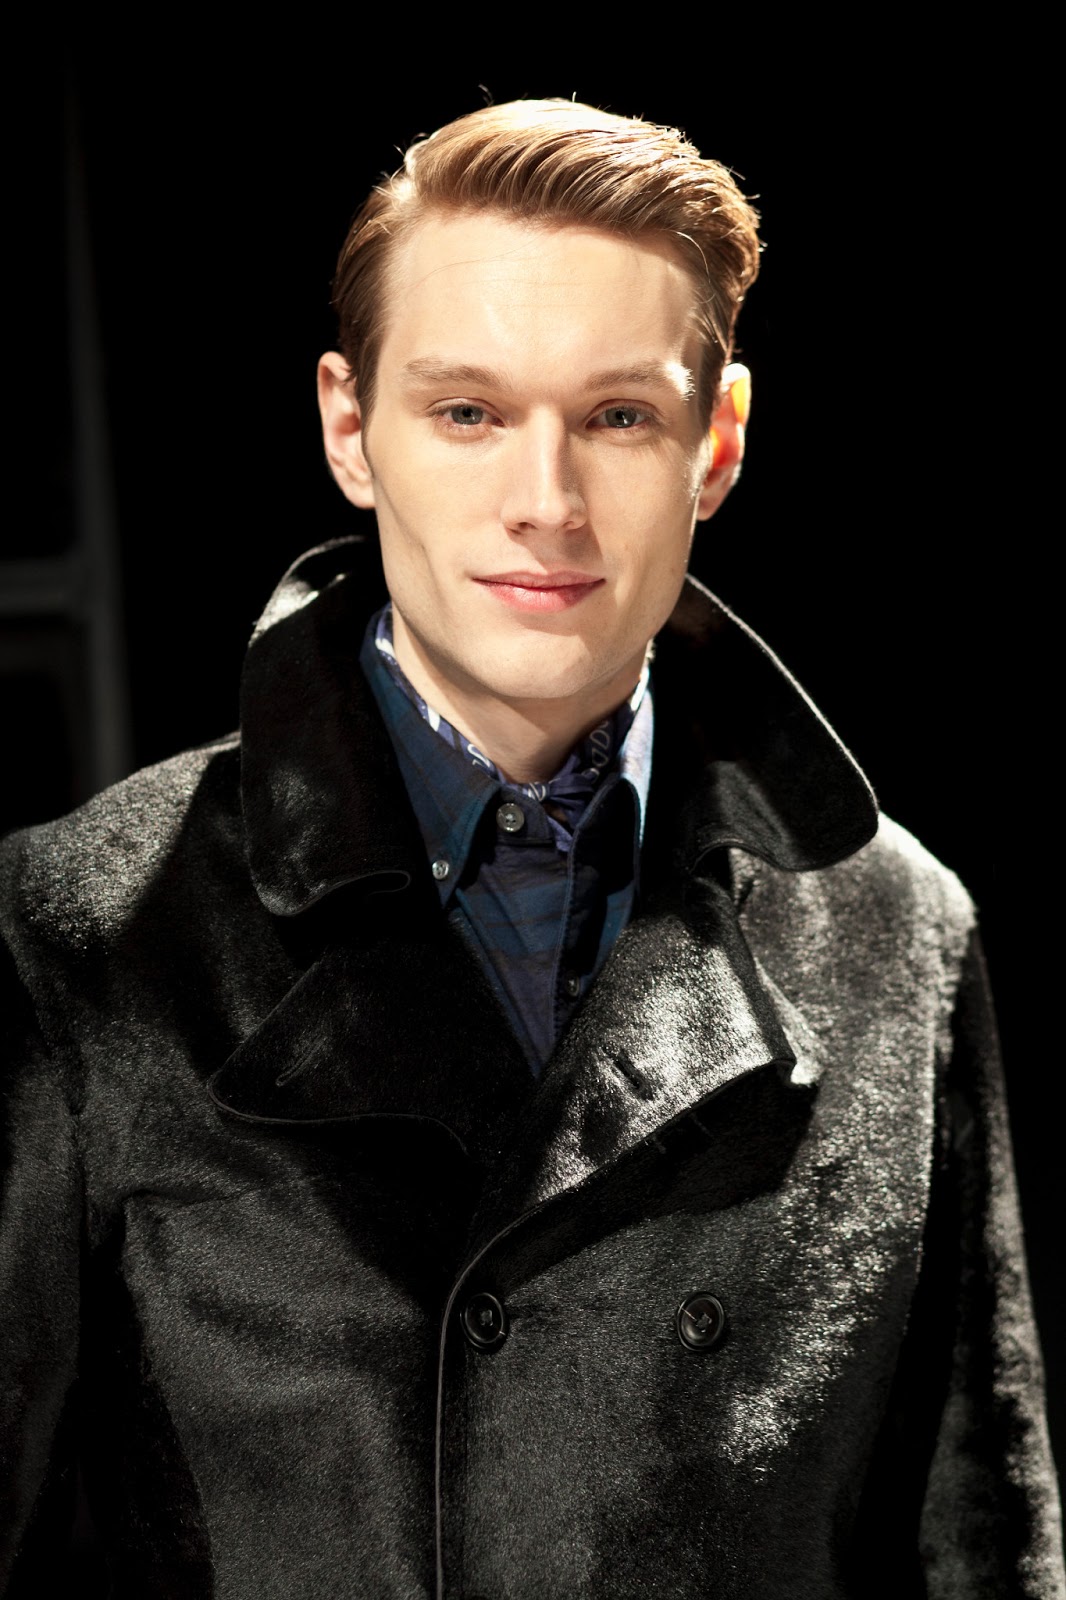 Alex Grant: B-Role: Behind the Scenes of Todd Snyder's FW'13